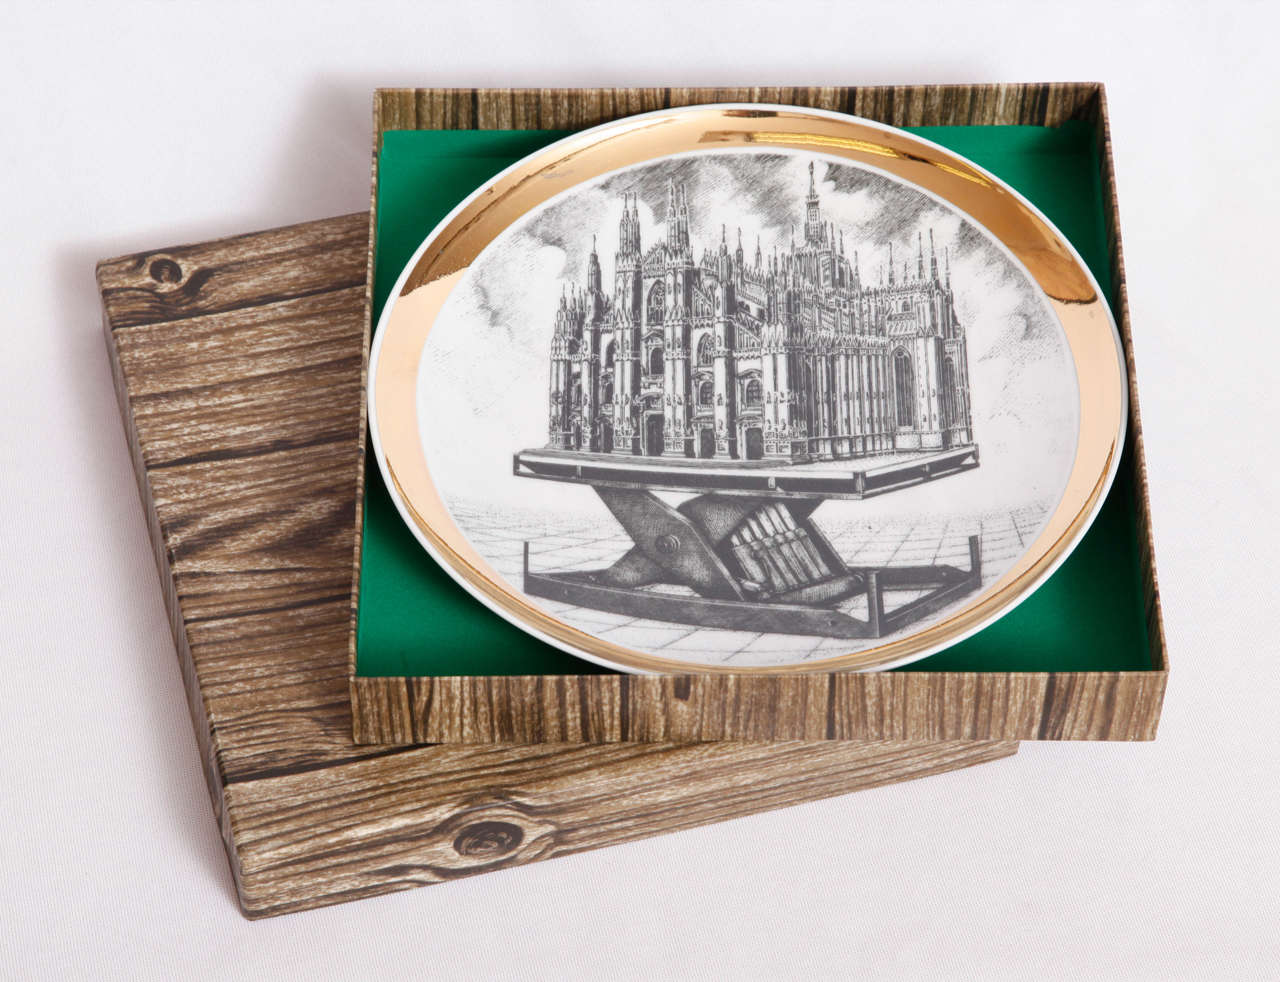 A limited edition porcelain plate showing the Milan cathedrale (Italy) designed and executed by Piero Fornasetti (1913-1988) with its original wood-like box.